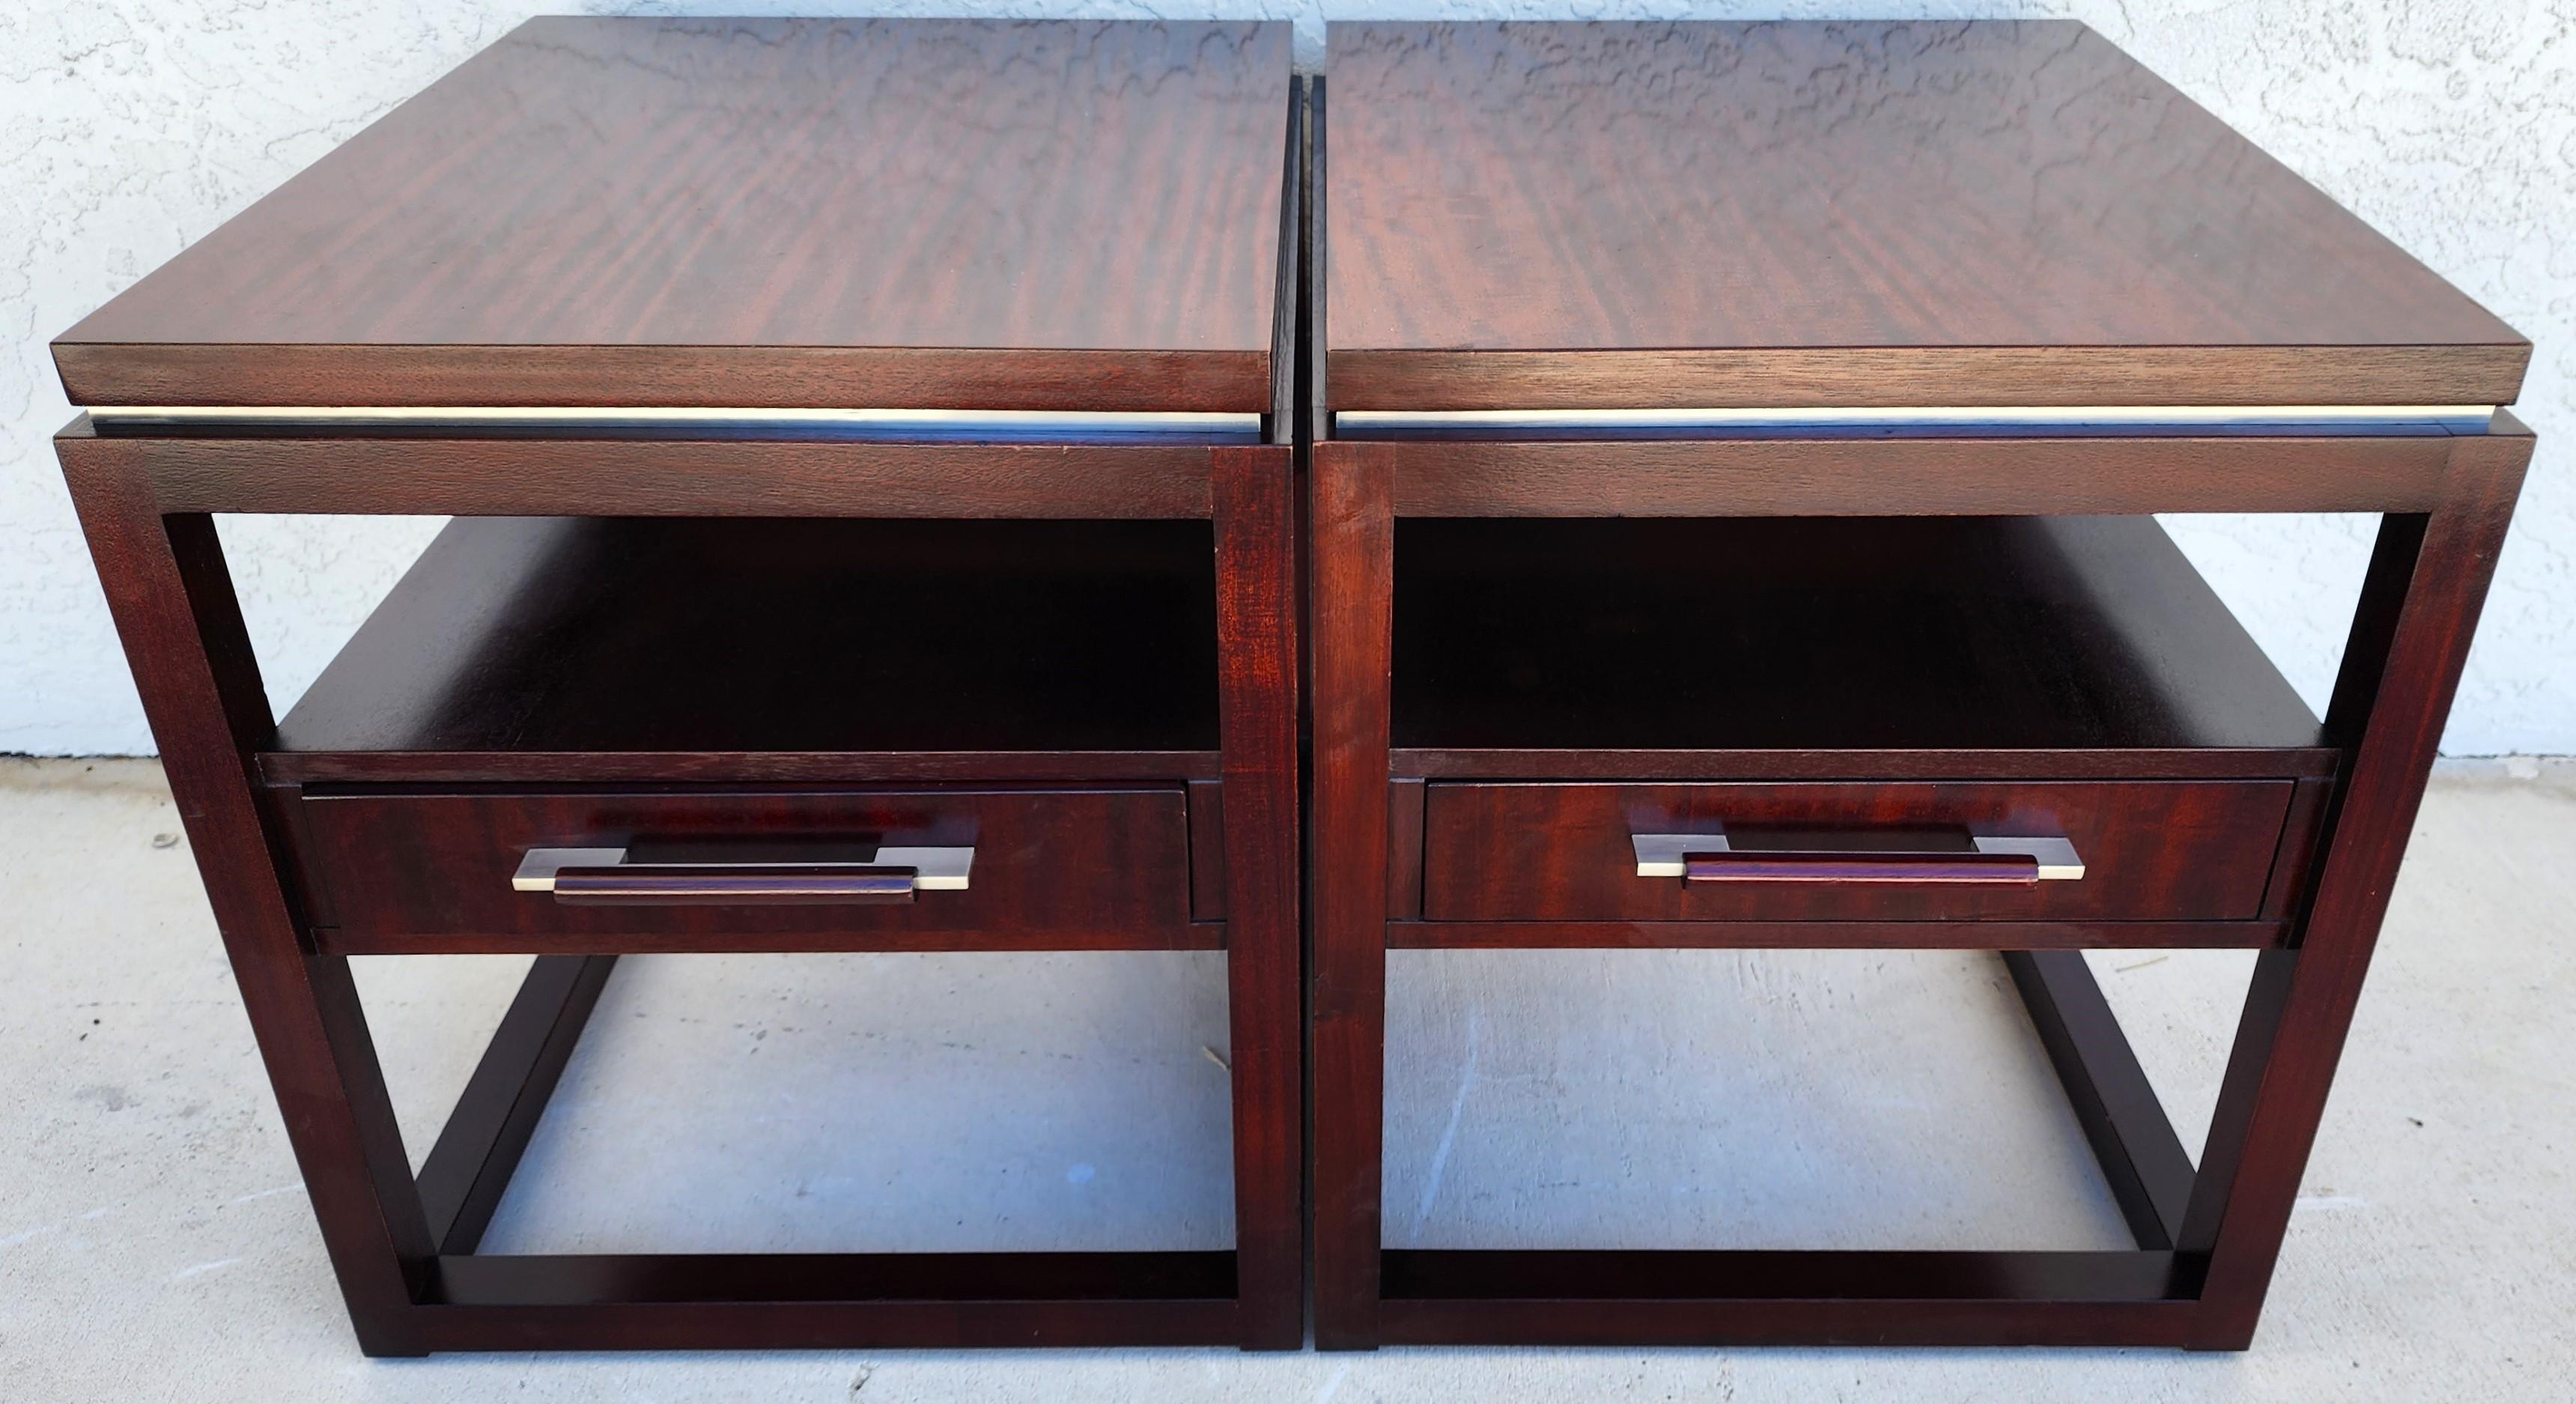 For FULL item description click on CONTINUE READING at the bottom of this page.

Offering One Of Our Recent Palm Beach Estate Fine Furniture Acquisitions Of A
Pair of Mid Century Modern Nightstands Side End Tables by HENREDON

Approximate